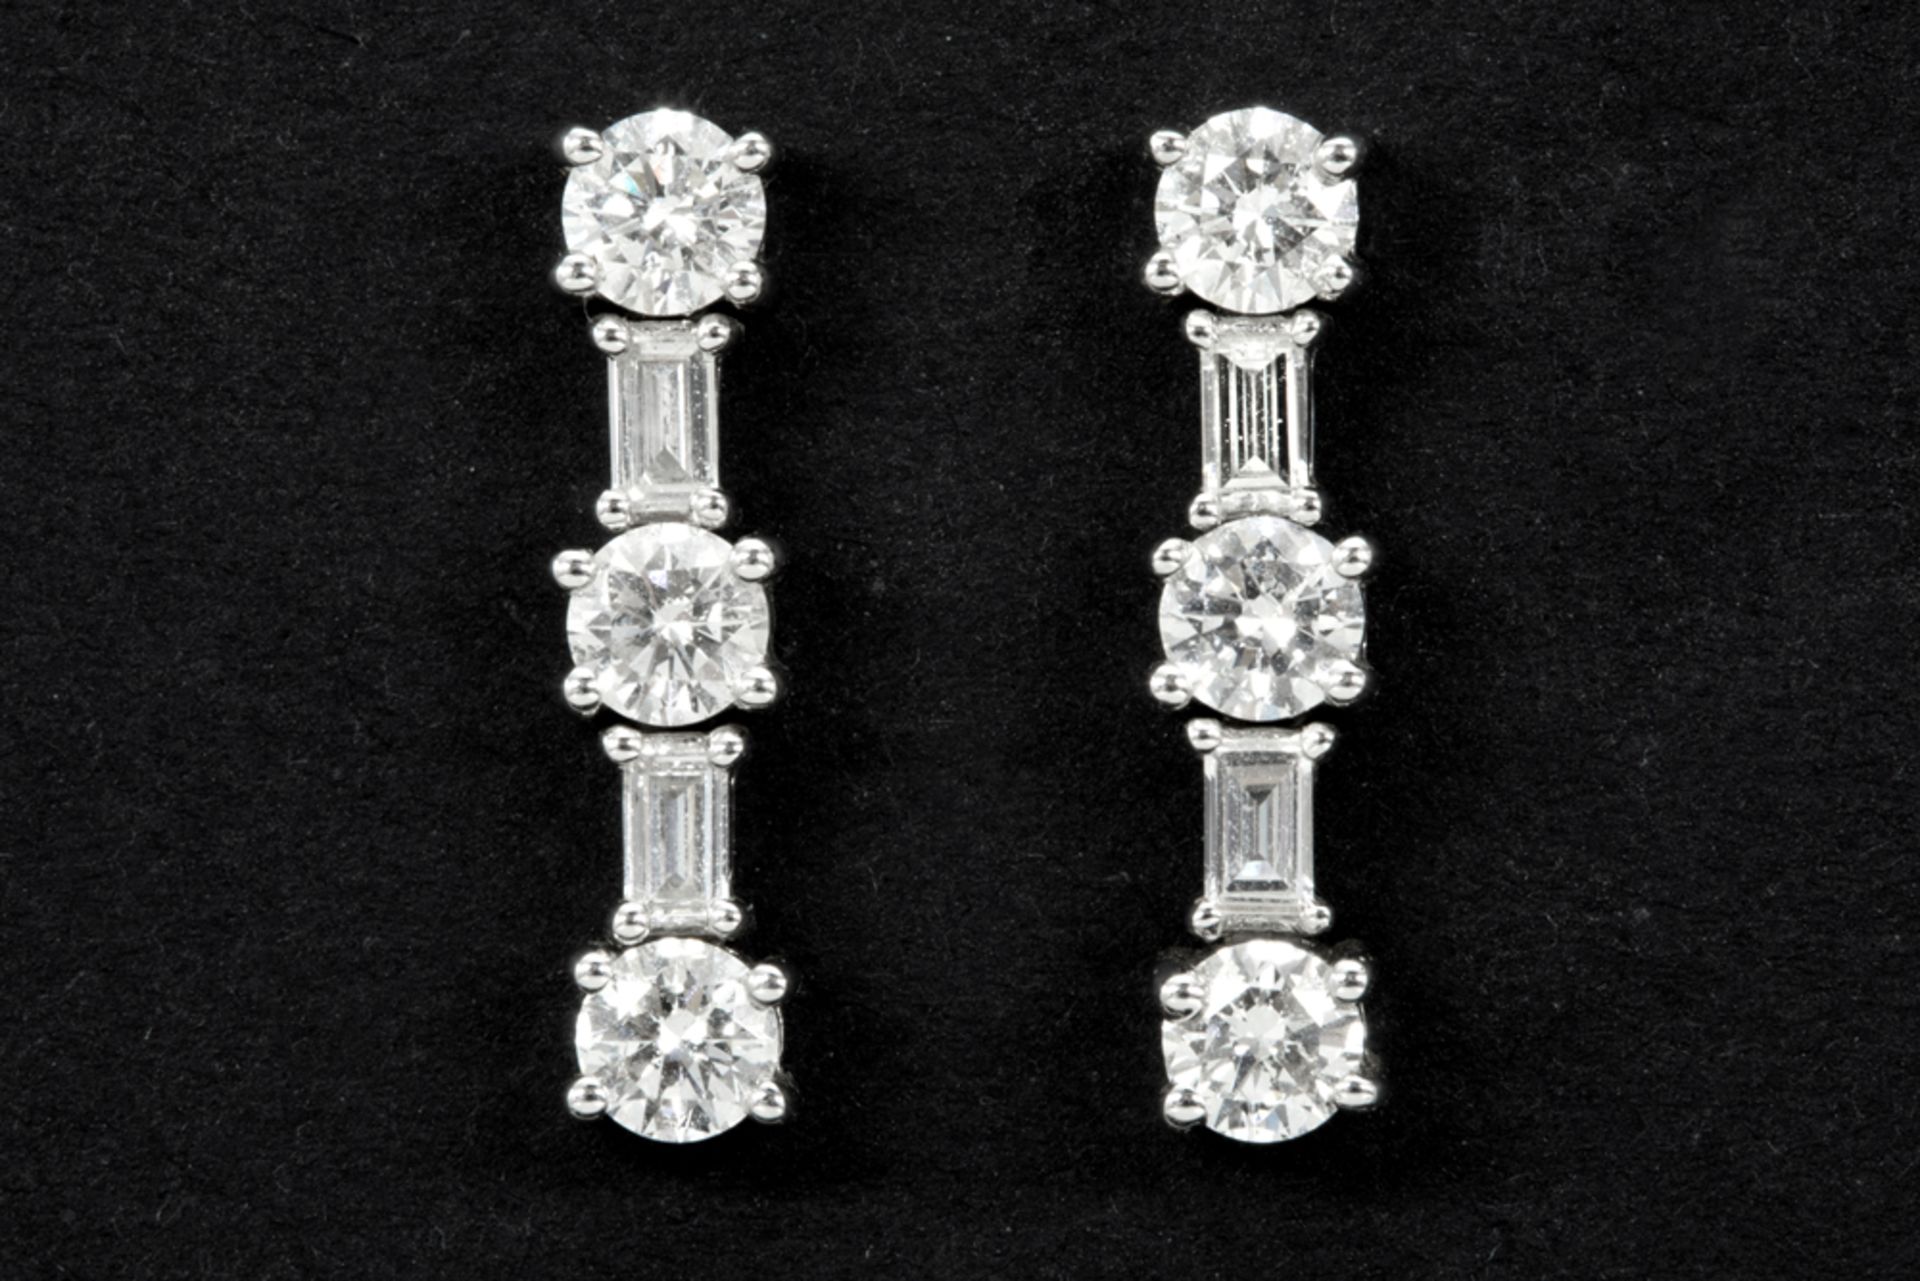 pair of earrings in white gold (18 carat) with more than 1,20 carat of high quality baguette and